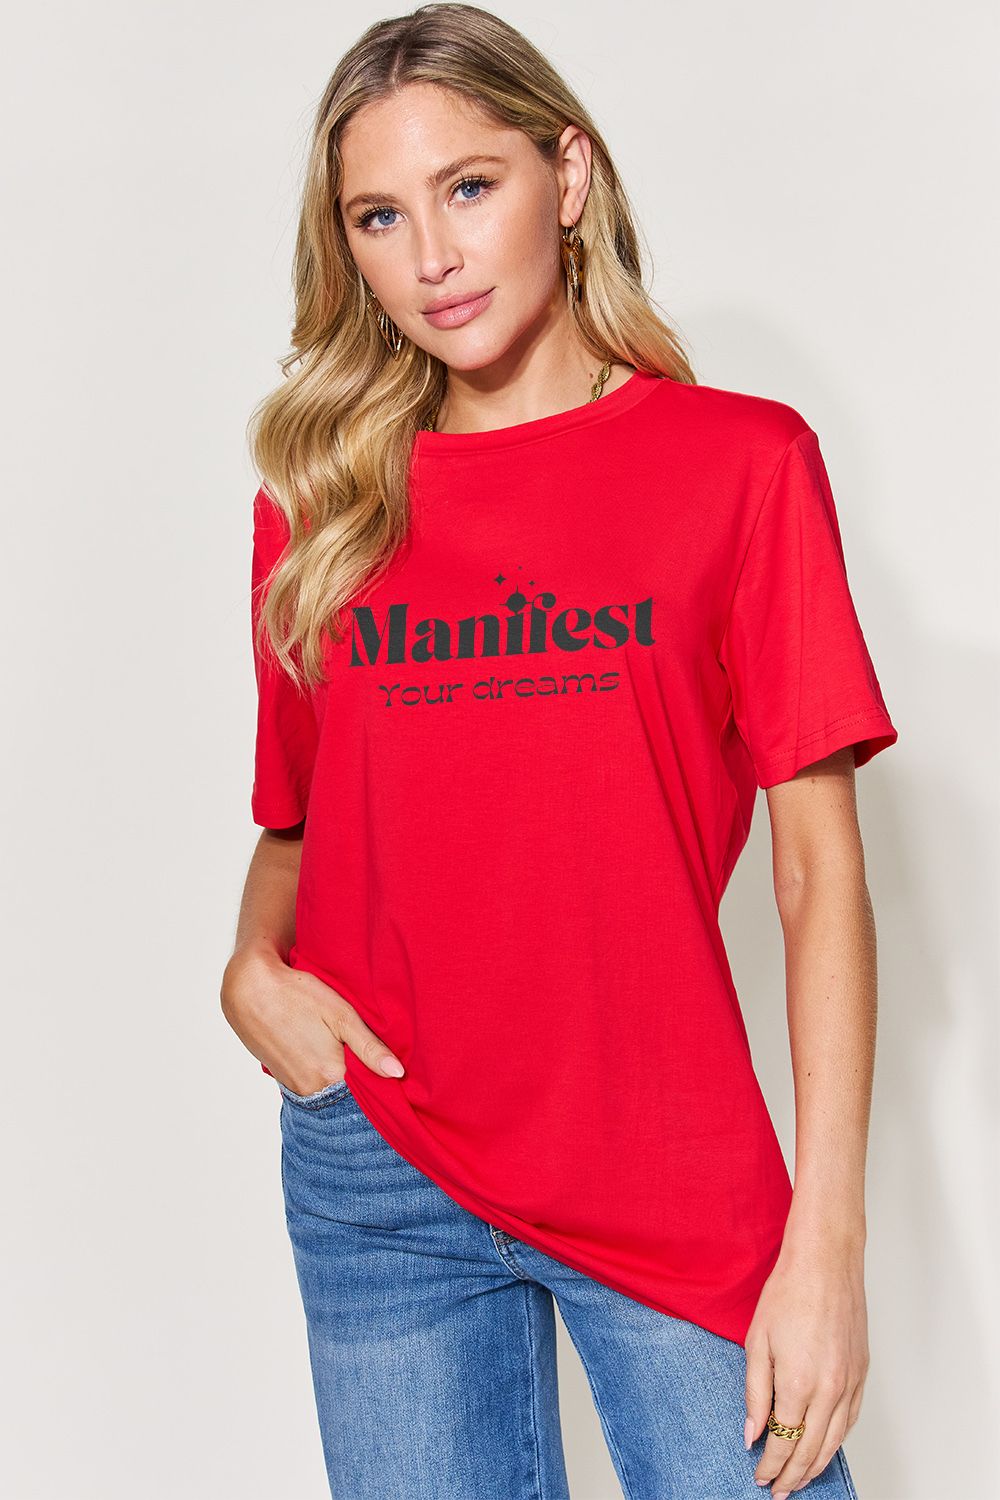 Simply Love MANIFEST YOUR DREAMS Printed T-Shirt